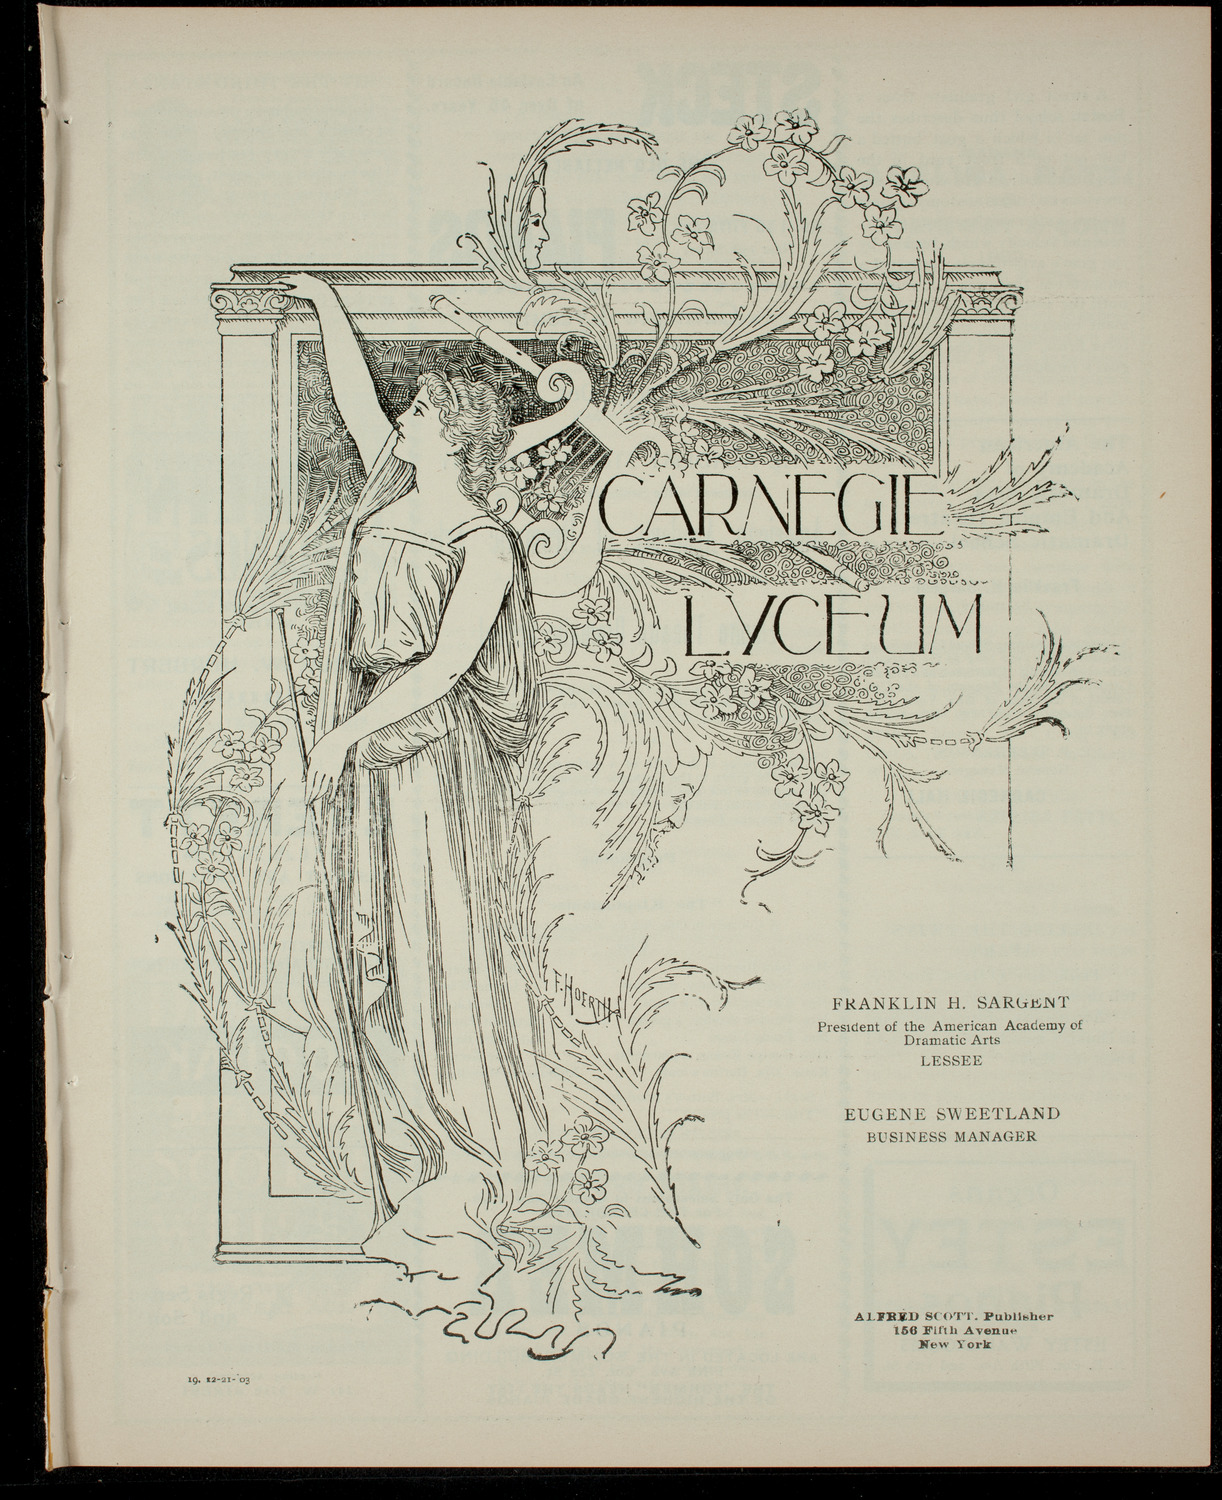 Academy Stock Company of the American Academy of Dramatic Arts/ Empire Theatre Dramatic School, December 21, 1903, program page 1